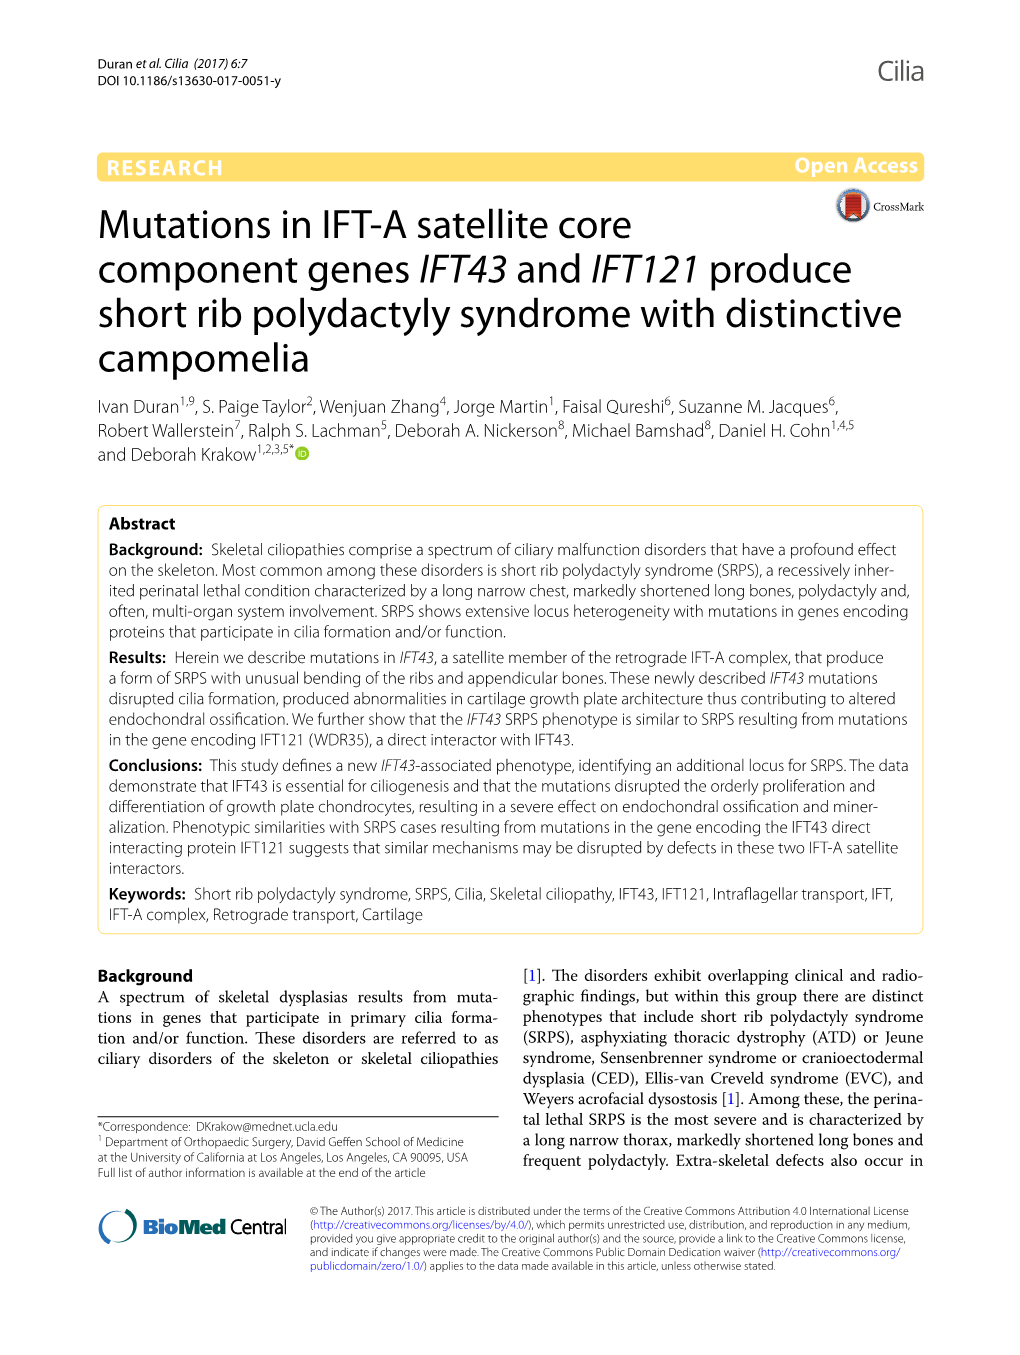 Mutations in IFT-A Satellite Core Component Genes IFT43 And